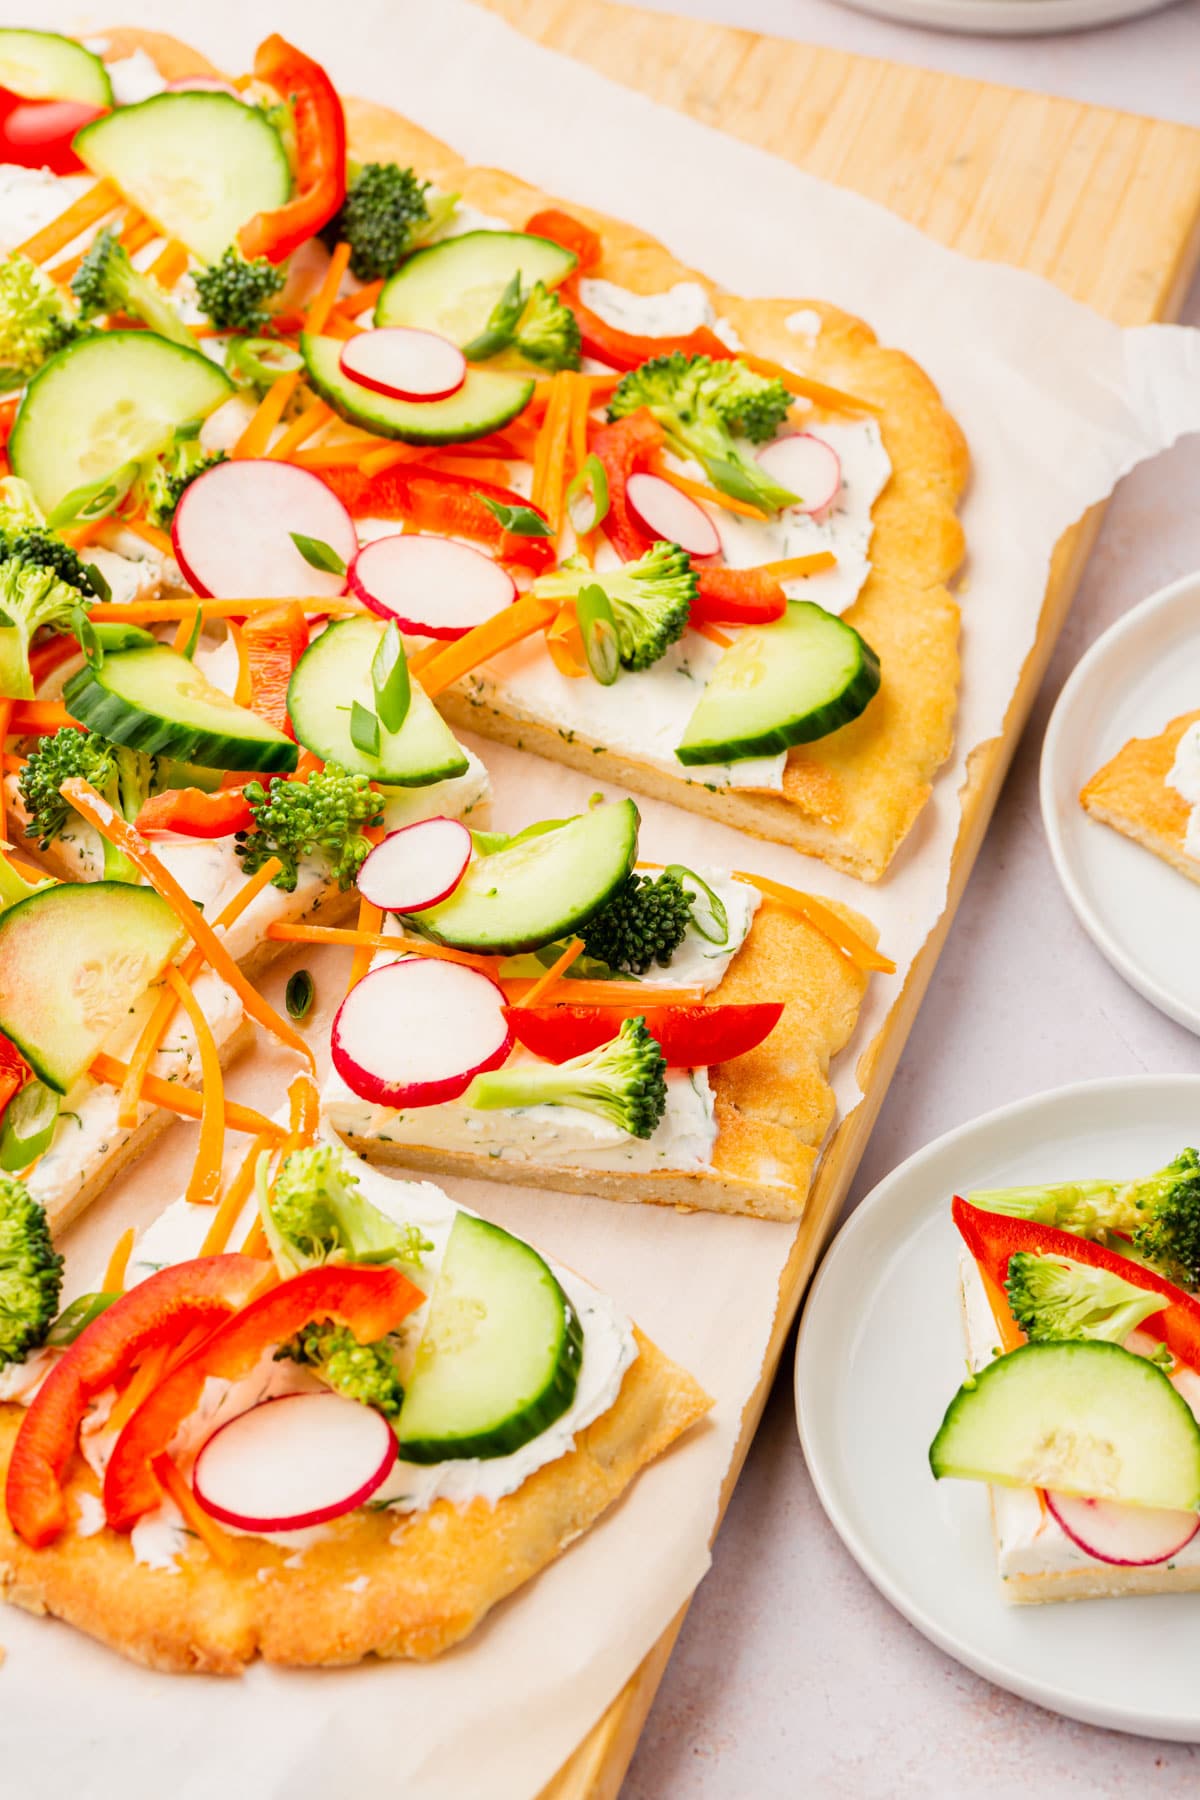 Gluten-free cold veggie pizza on a cutting board with some single servings on plates to the side.